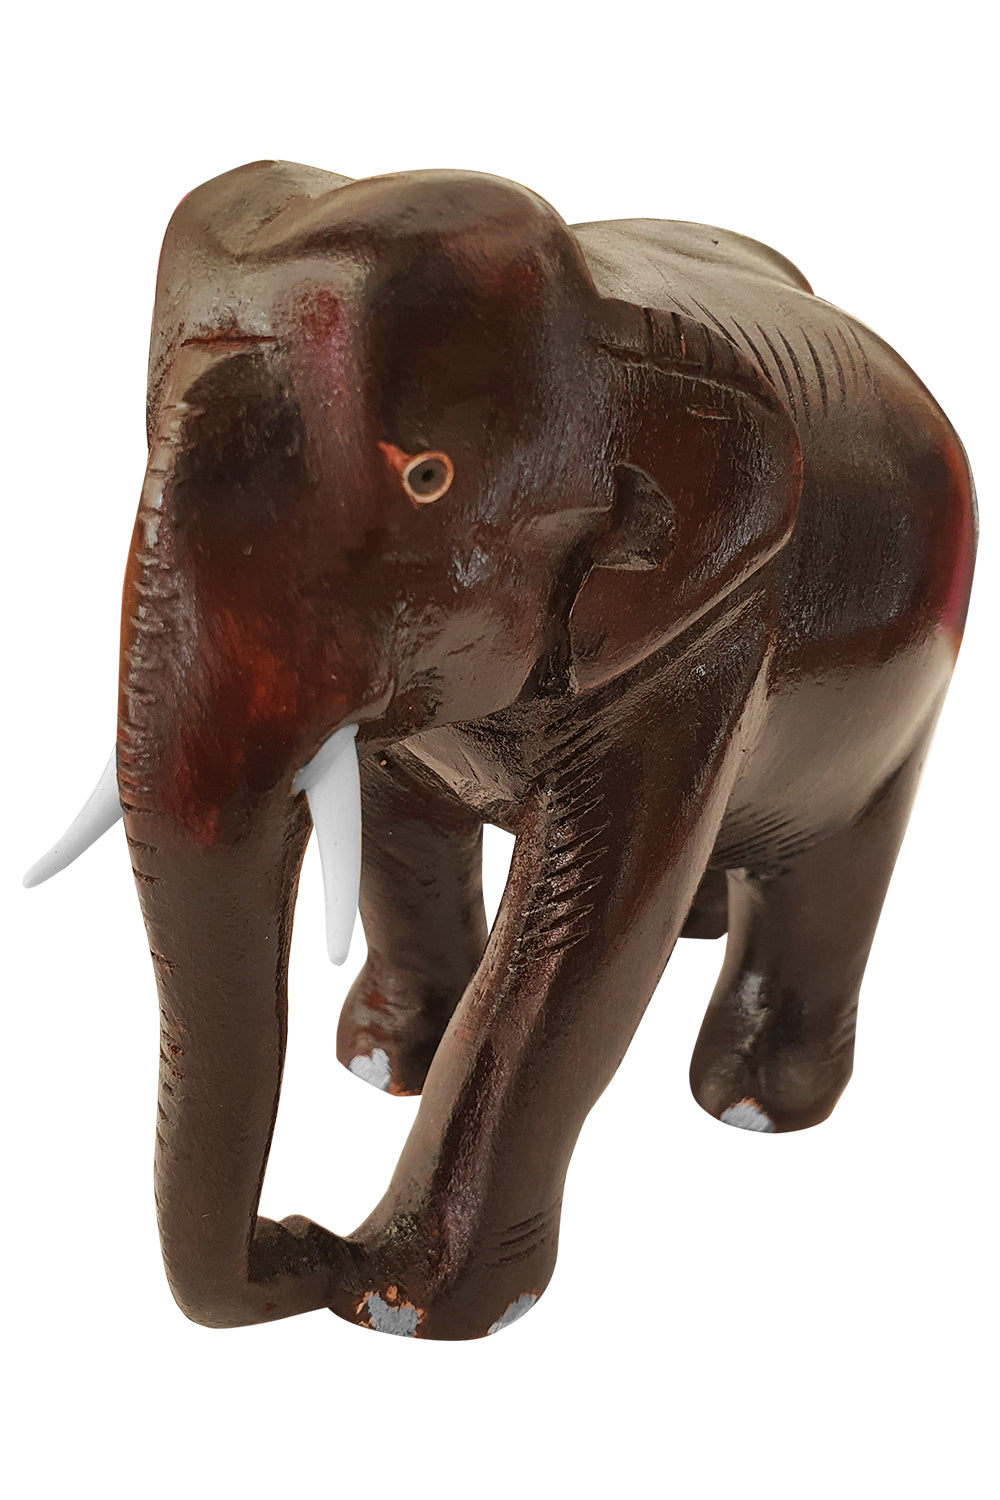 Southloom Handmade Elephant Handicraft (Carved from Mahogany Wood) 5 Inches